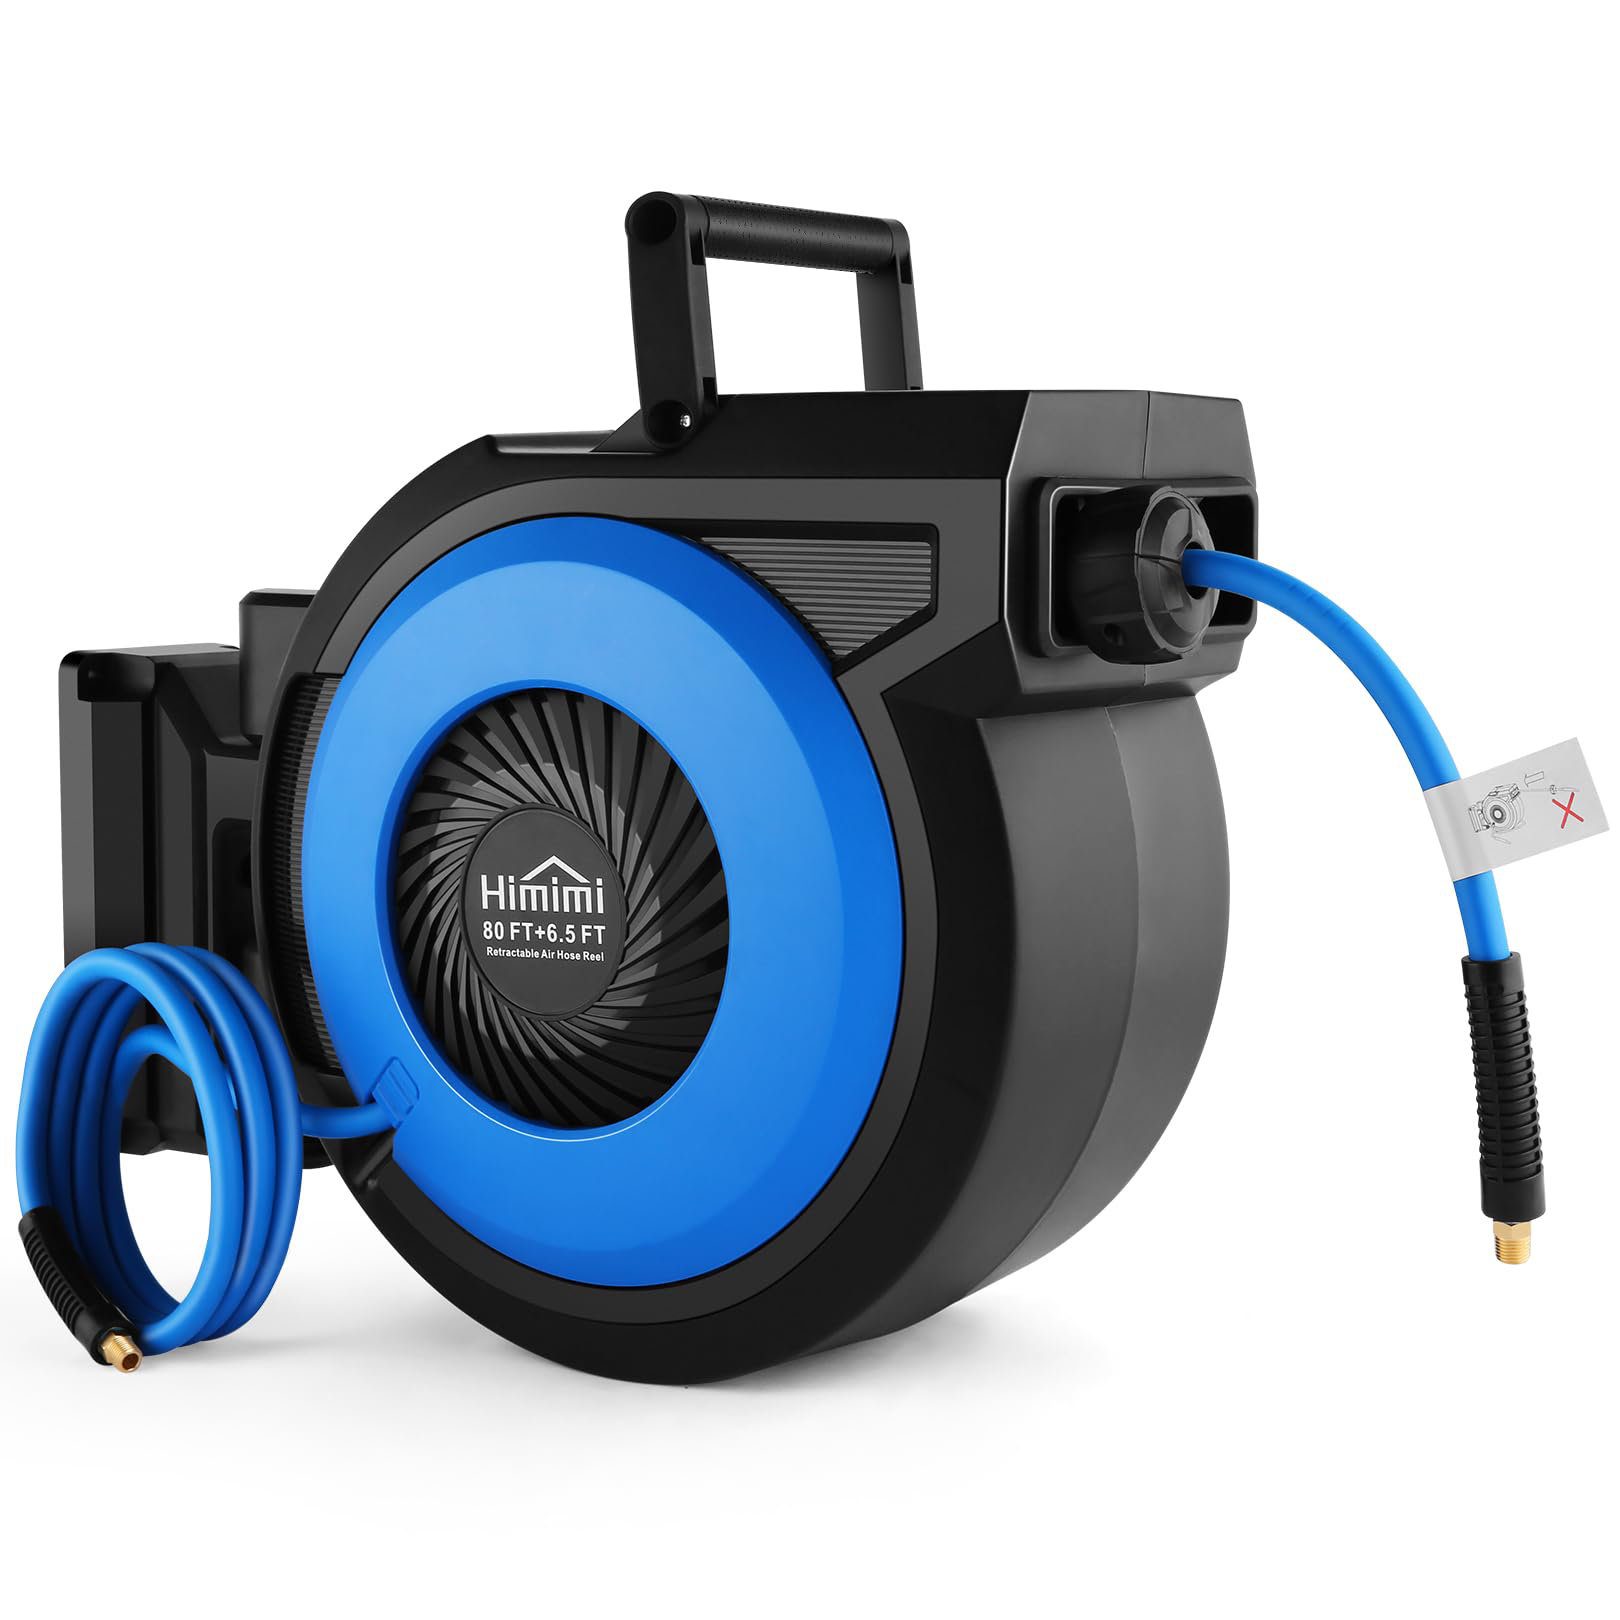 Himimi 80Ft Automatic Retractable Air Hose Reel Wall Mounted Hose Reel